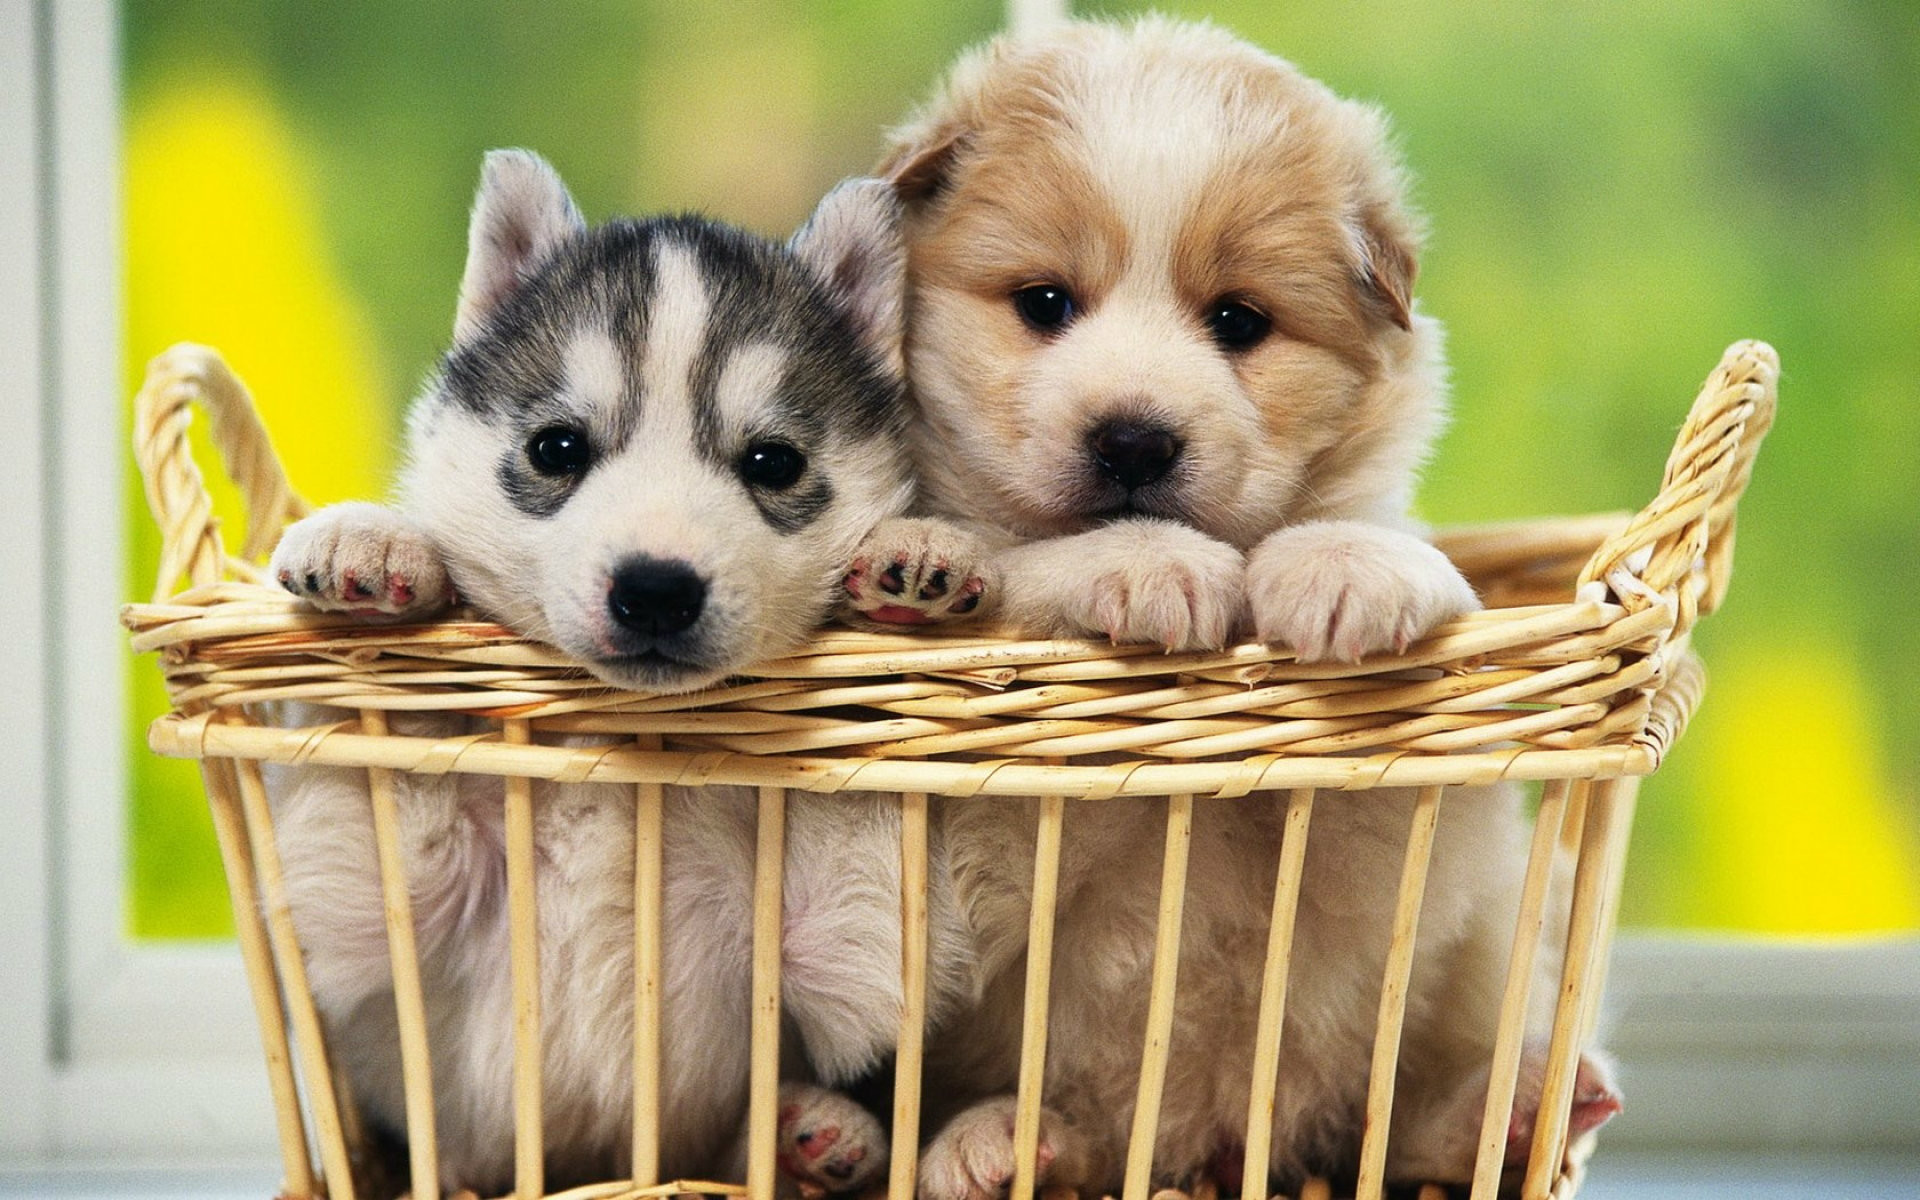 Images of Cute Dog Wallpapers